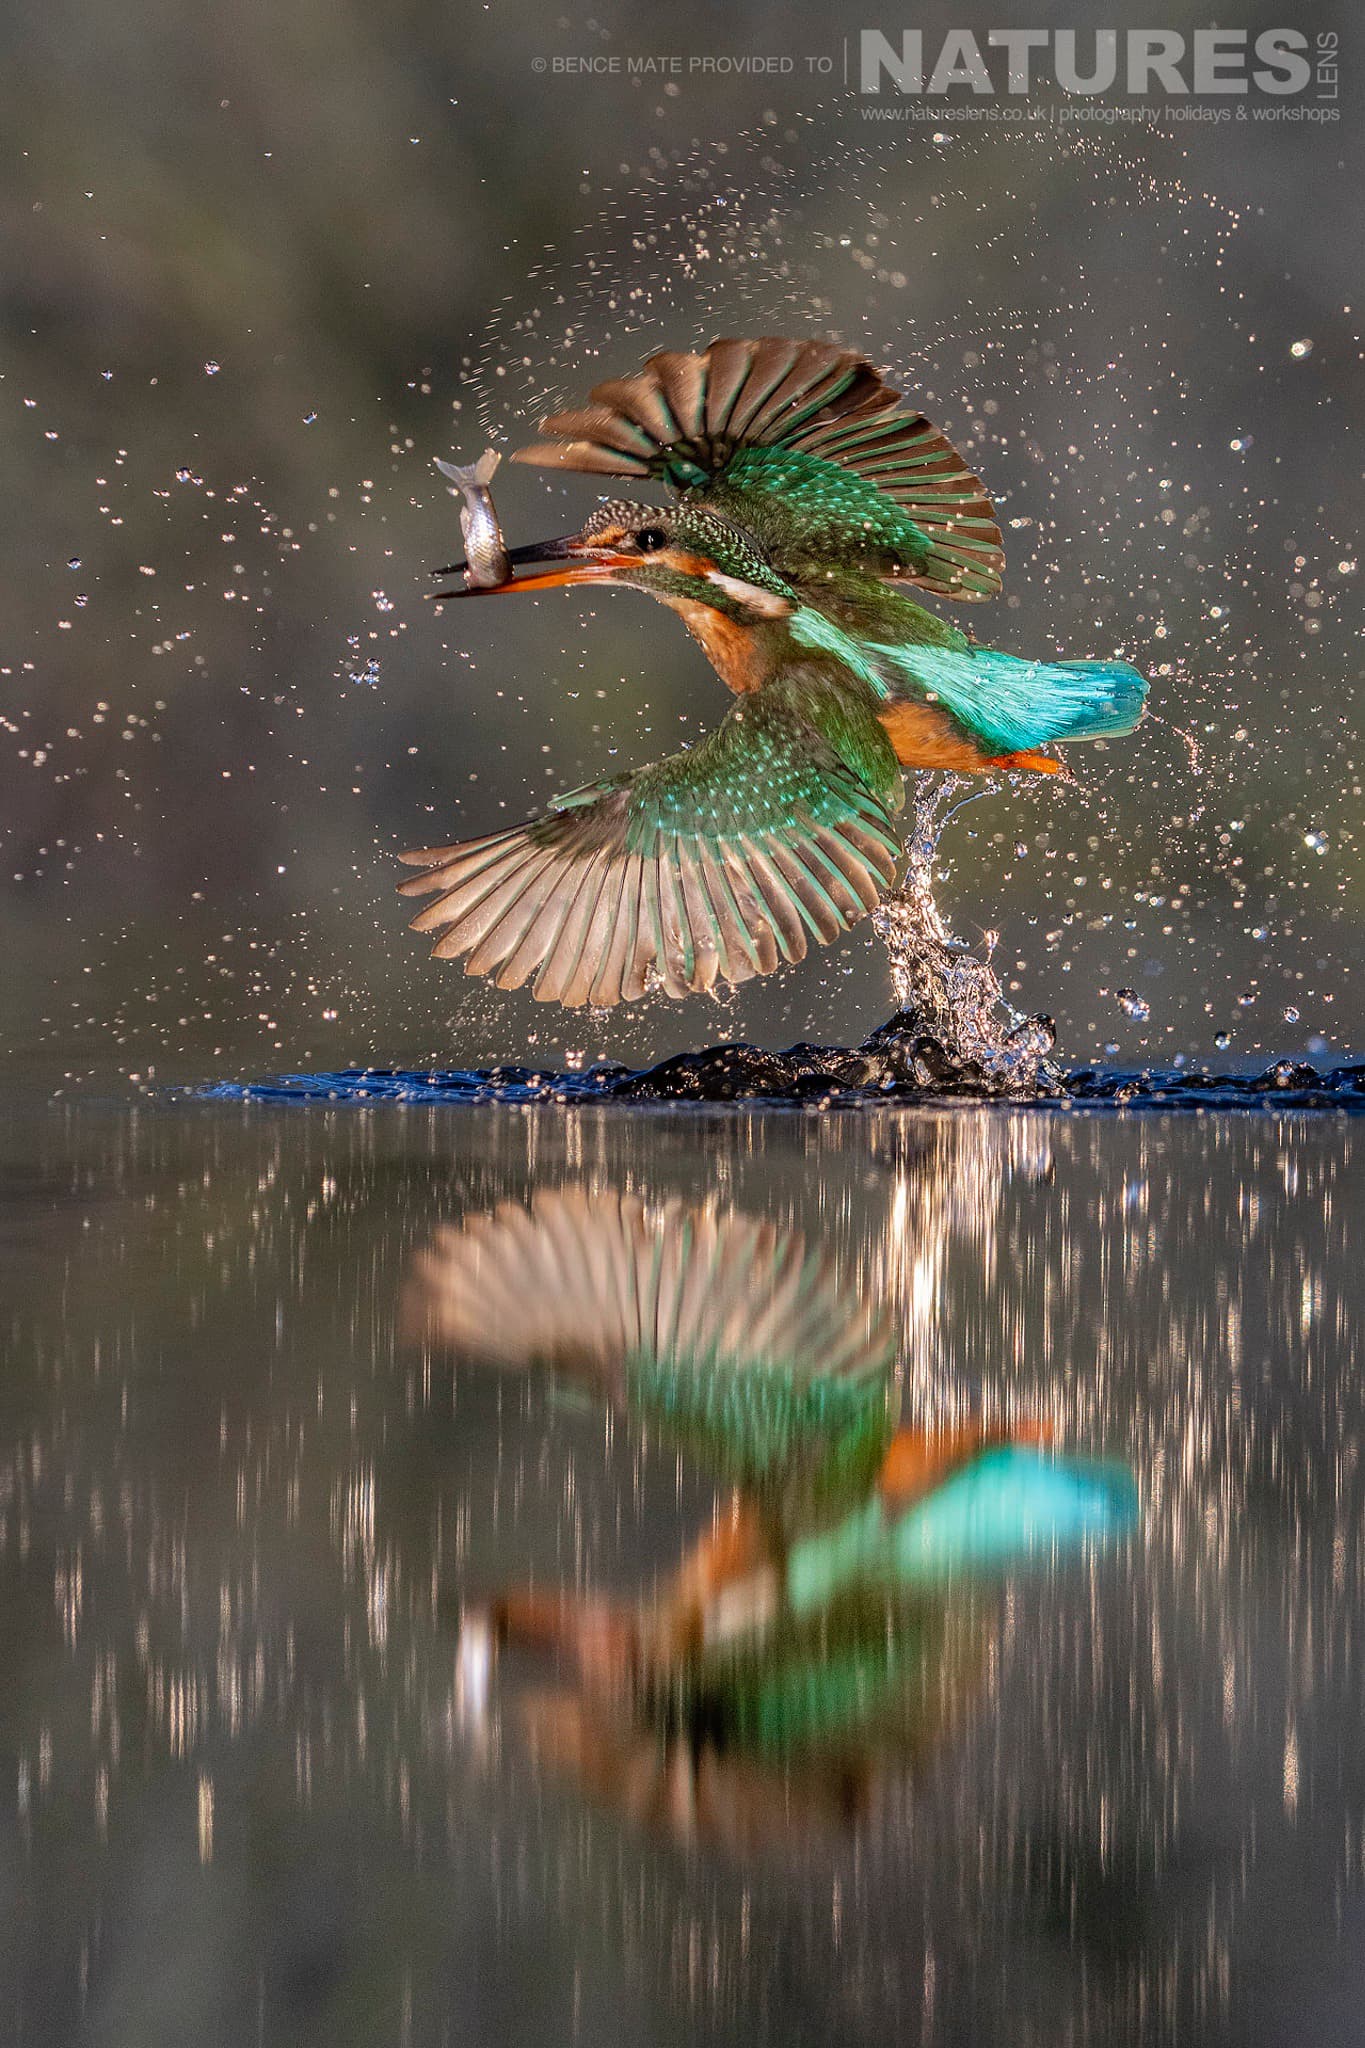 A kingfisher breaks free from the water at Bence Máté's Photography Hides during the Hungarian Winter